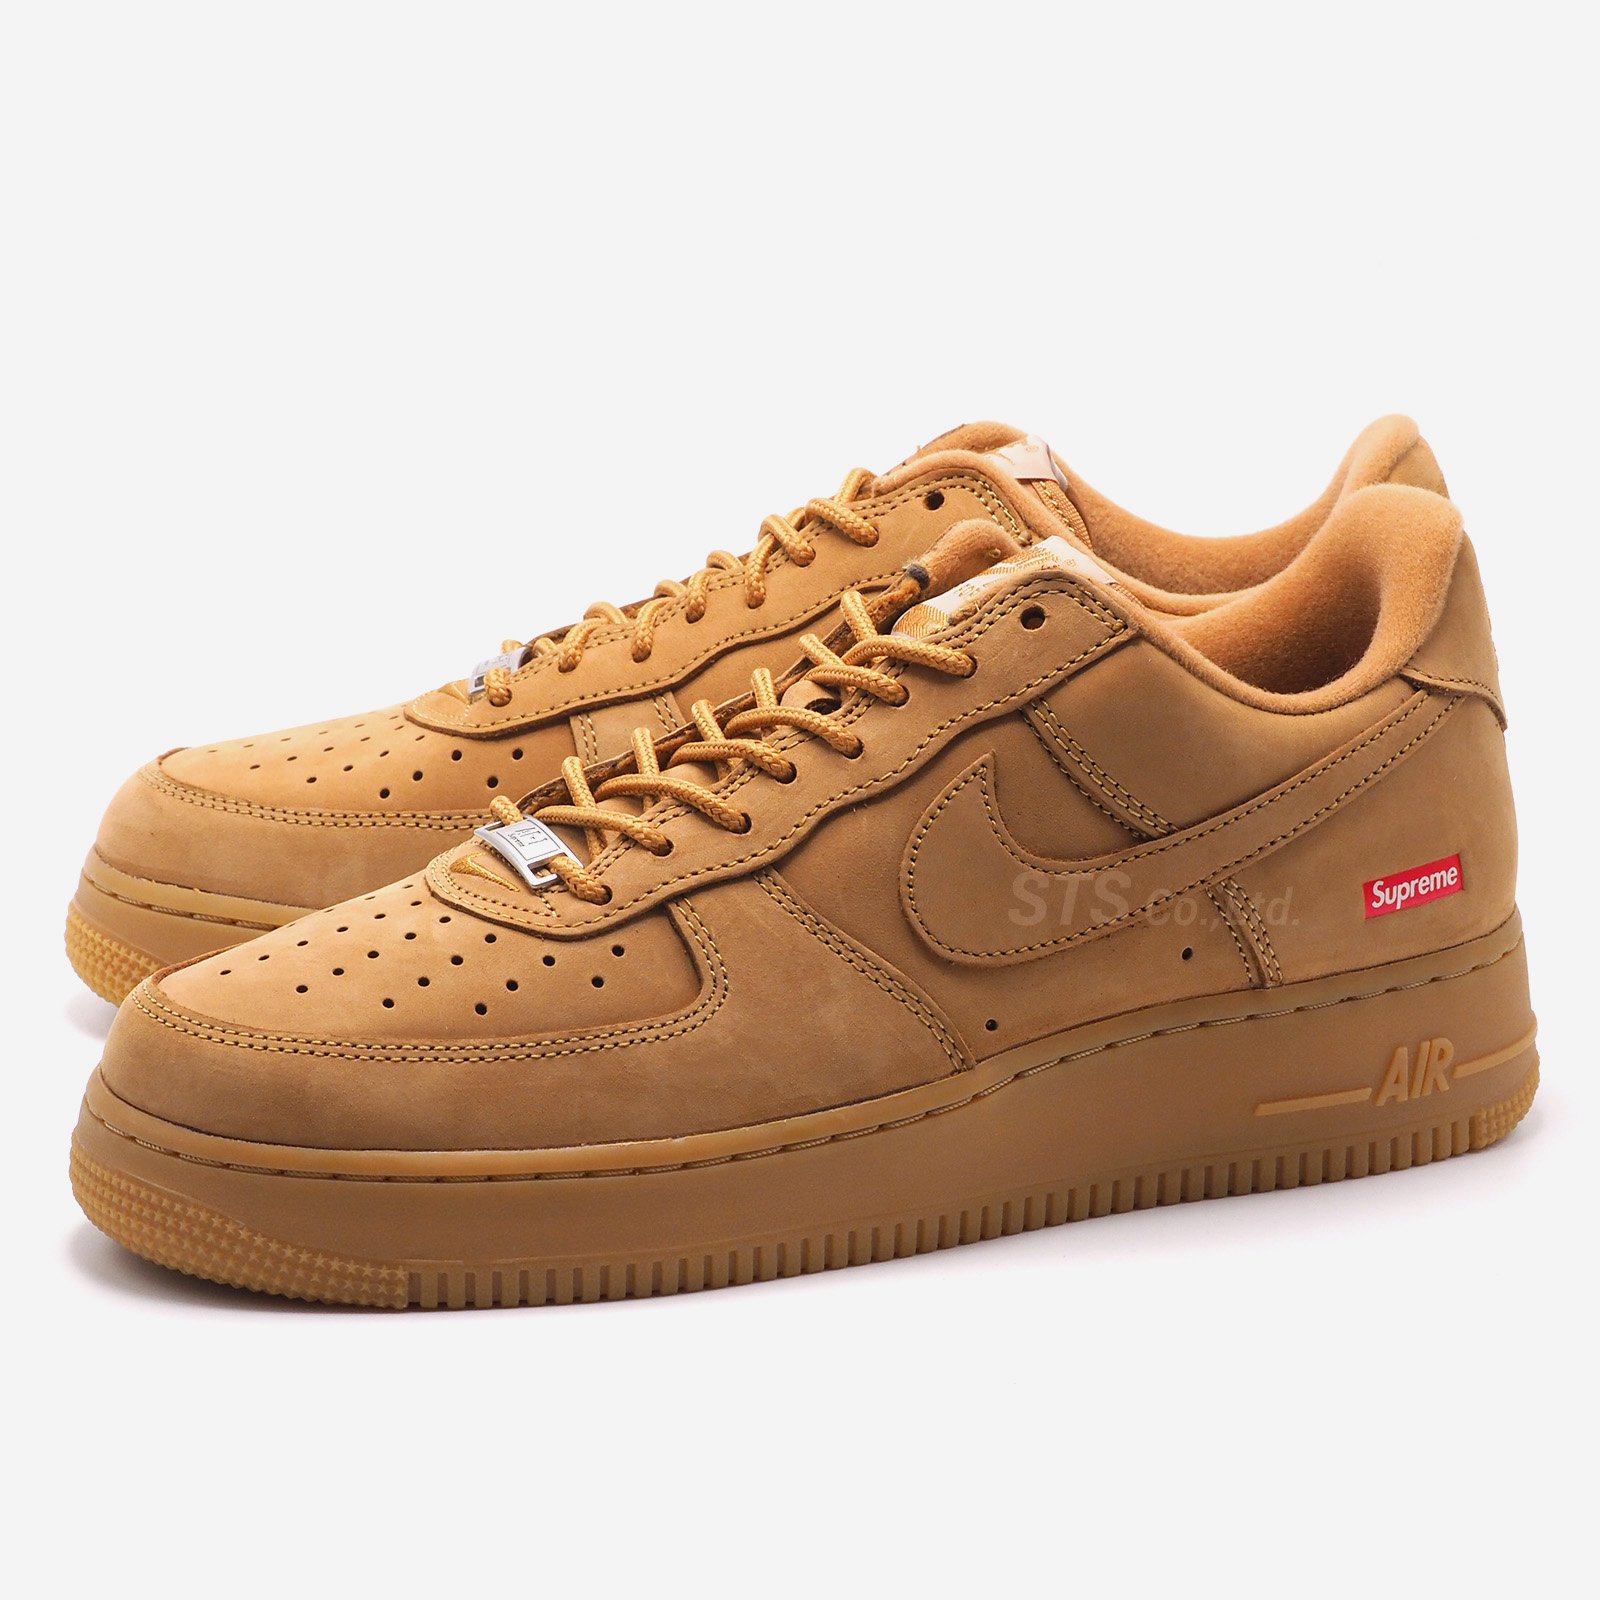 Supreme/Nike Air Force Low SP Wheat (US8 ～ US12)